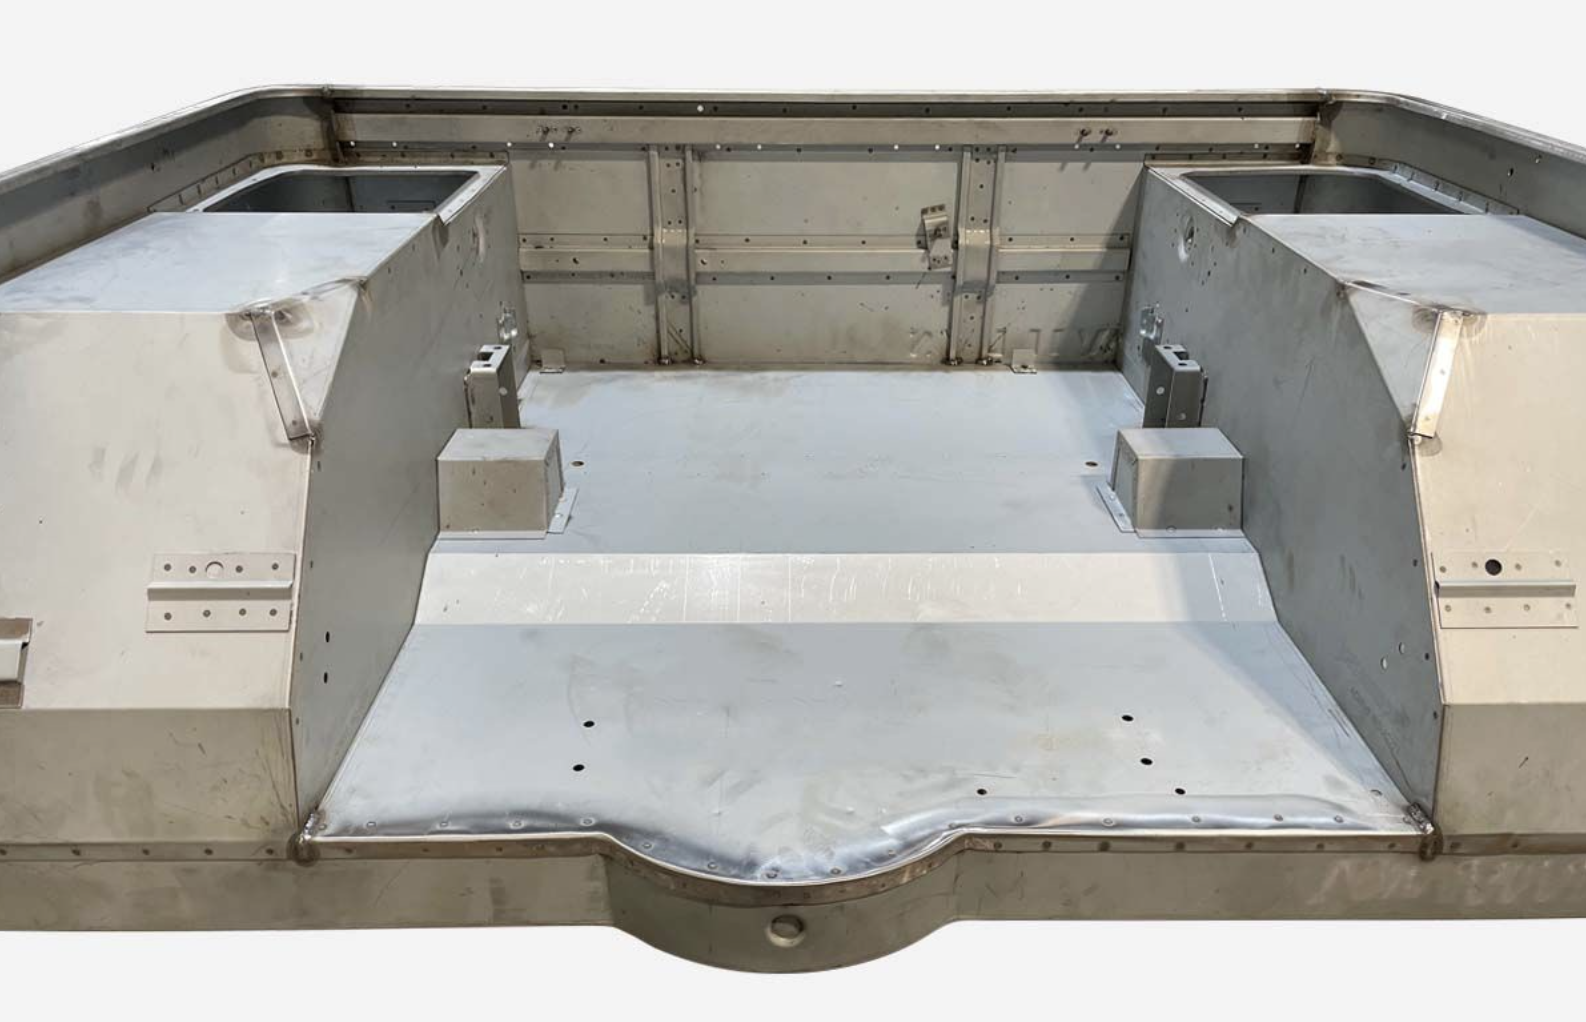 Internal view of the rear panel for a WW2 Jeep.